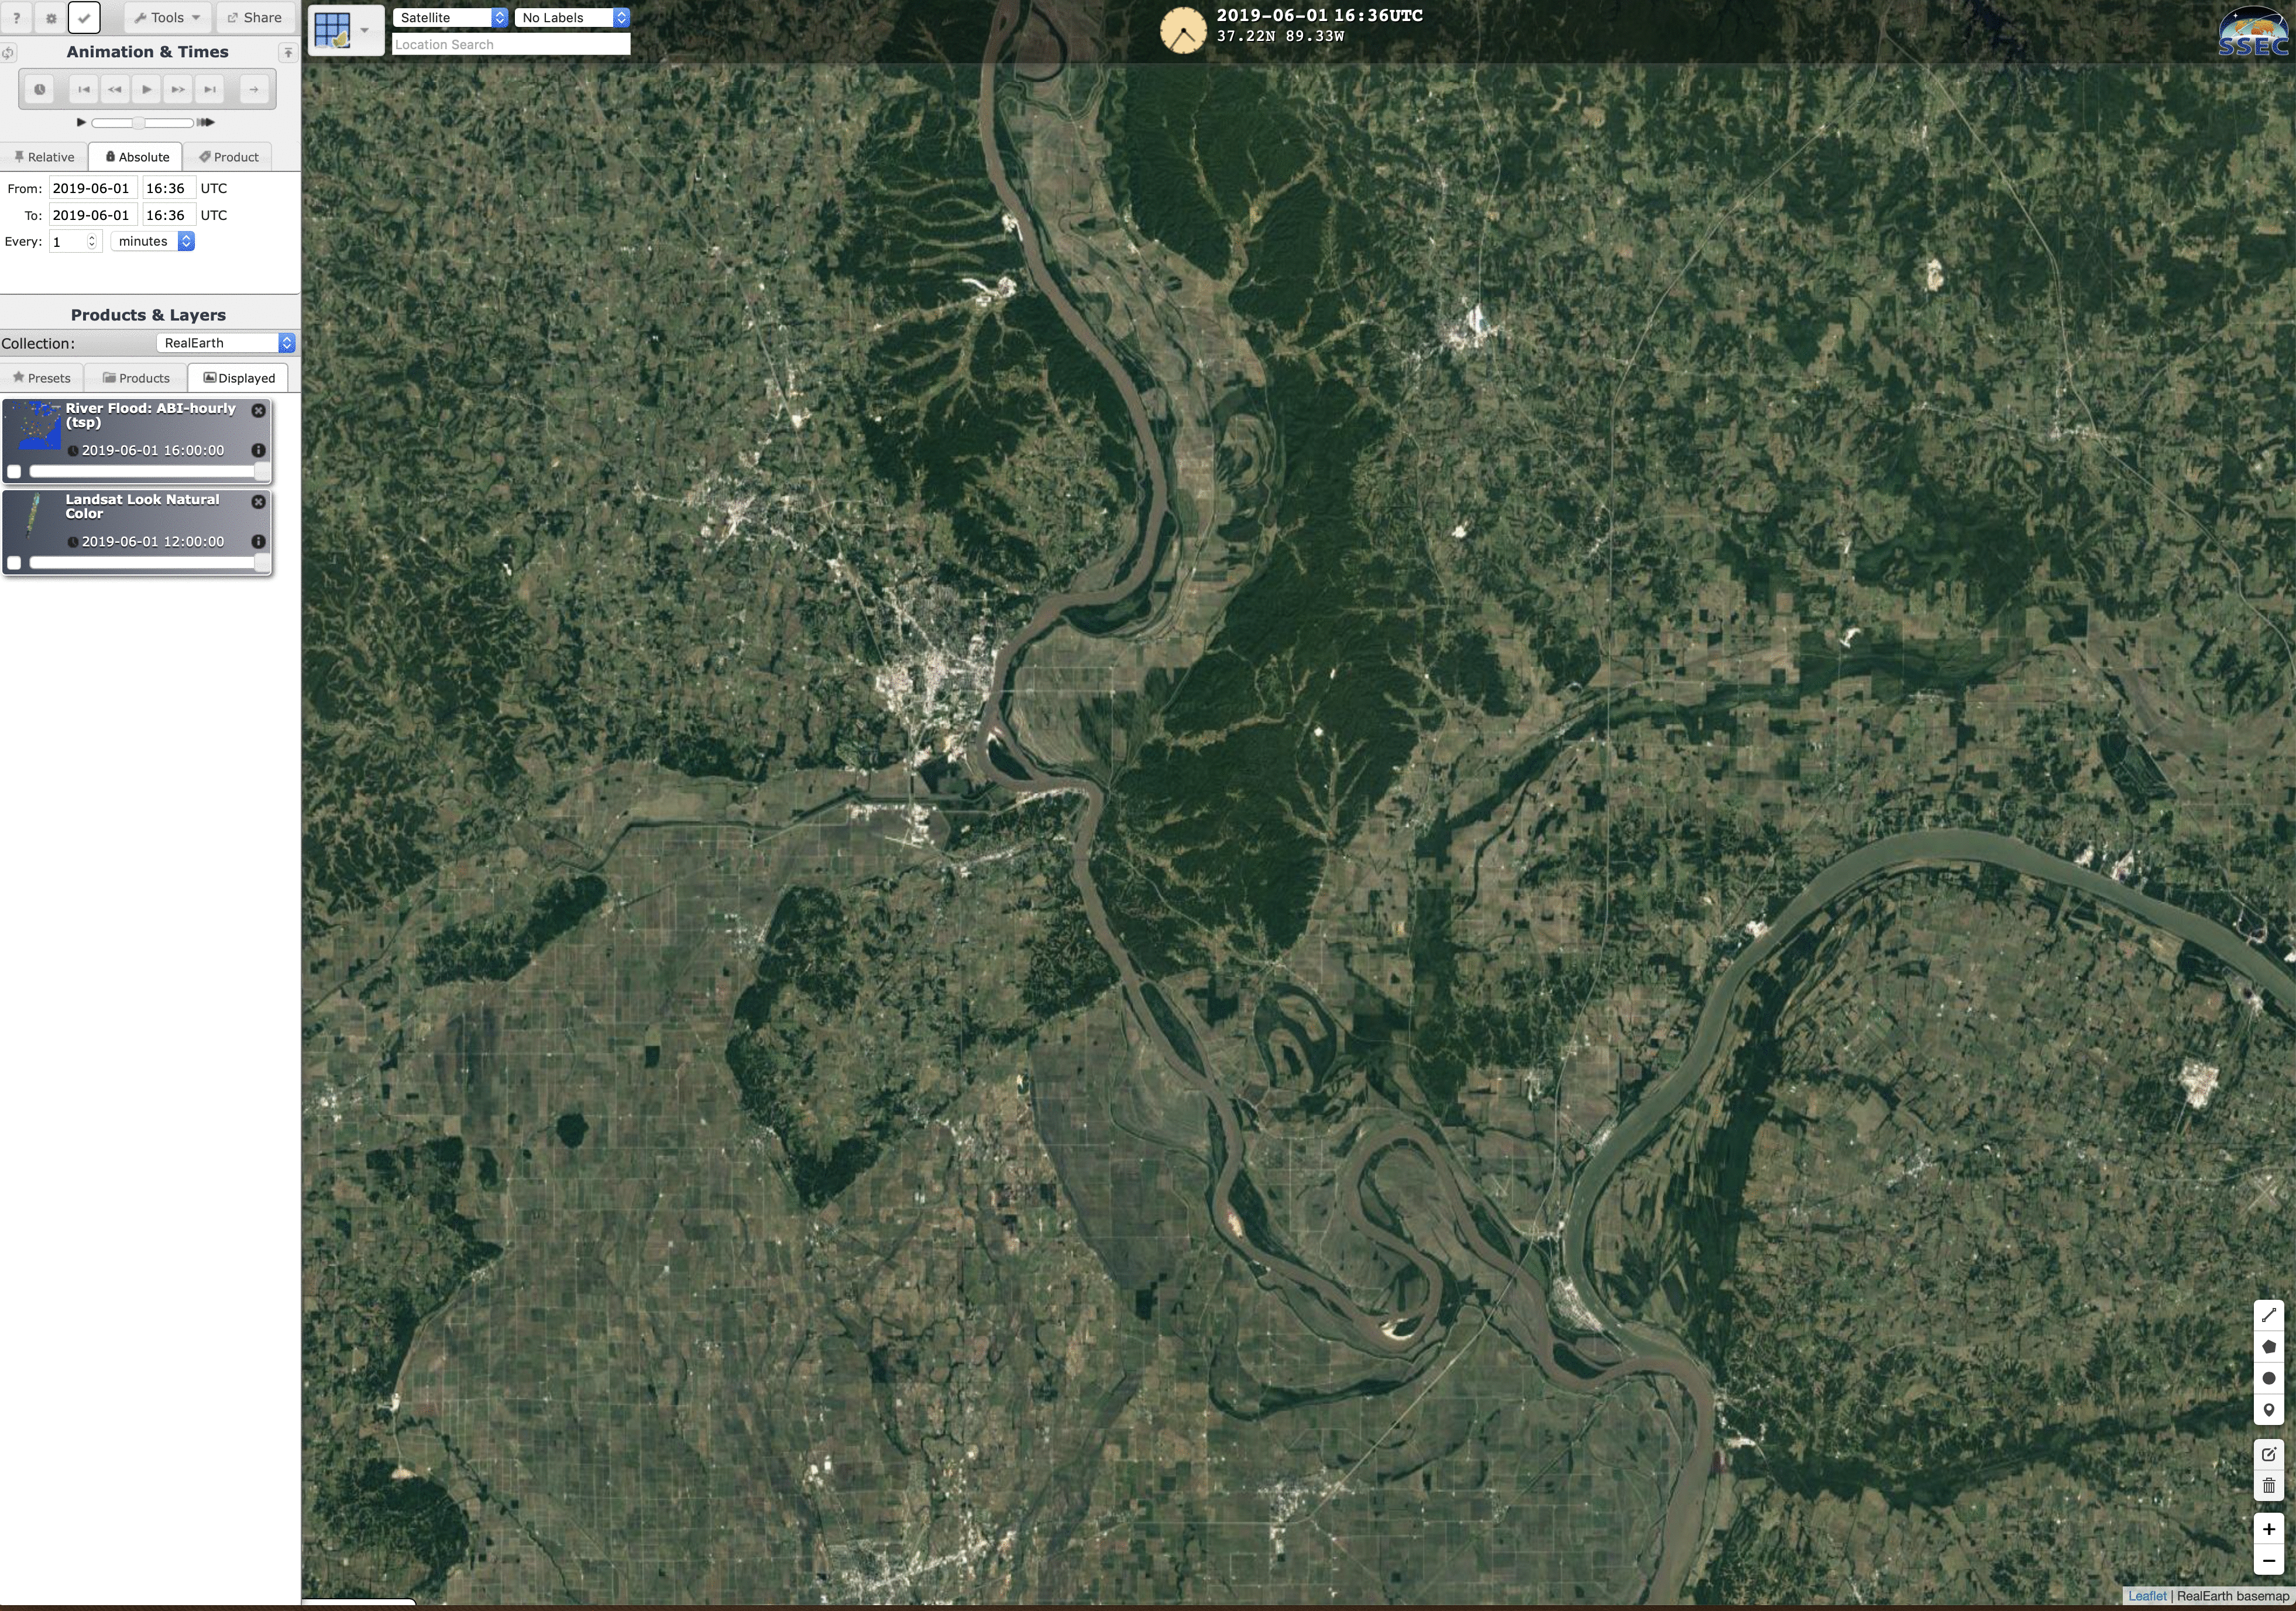 Landsat-8 False Color RGB images + GOES-16 River Flood Areal Extent product near the confluence of the Mississippi and Ohio Rivers [click to enlarge]